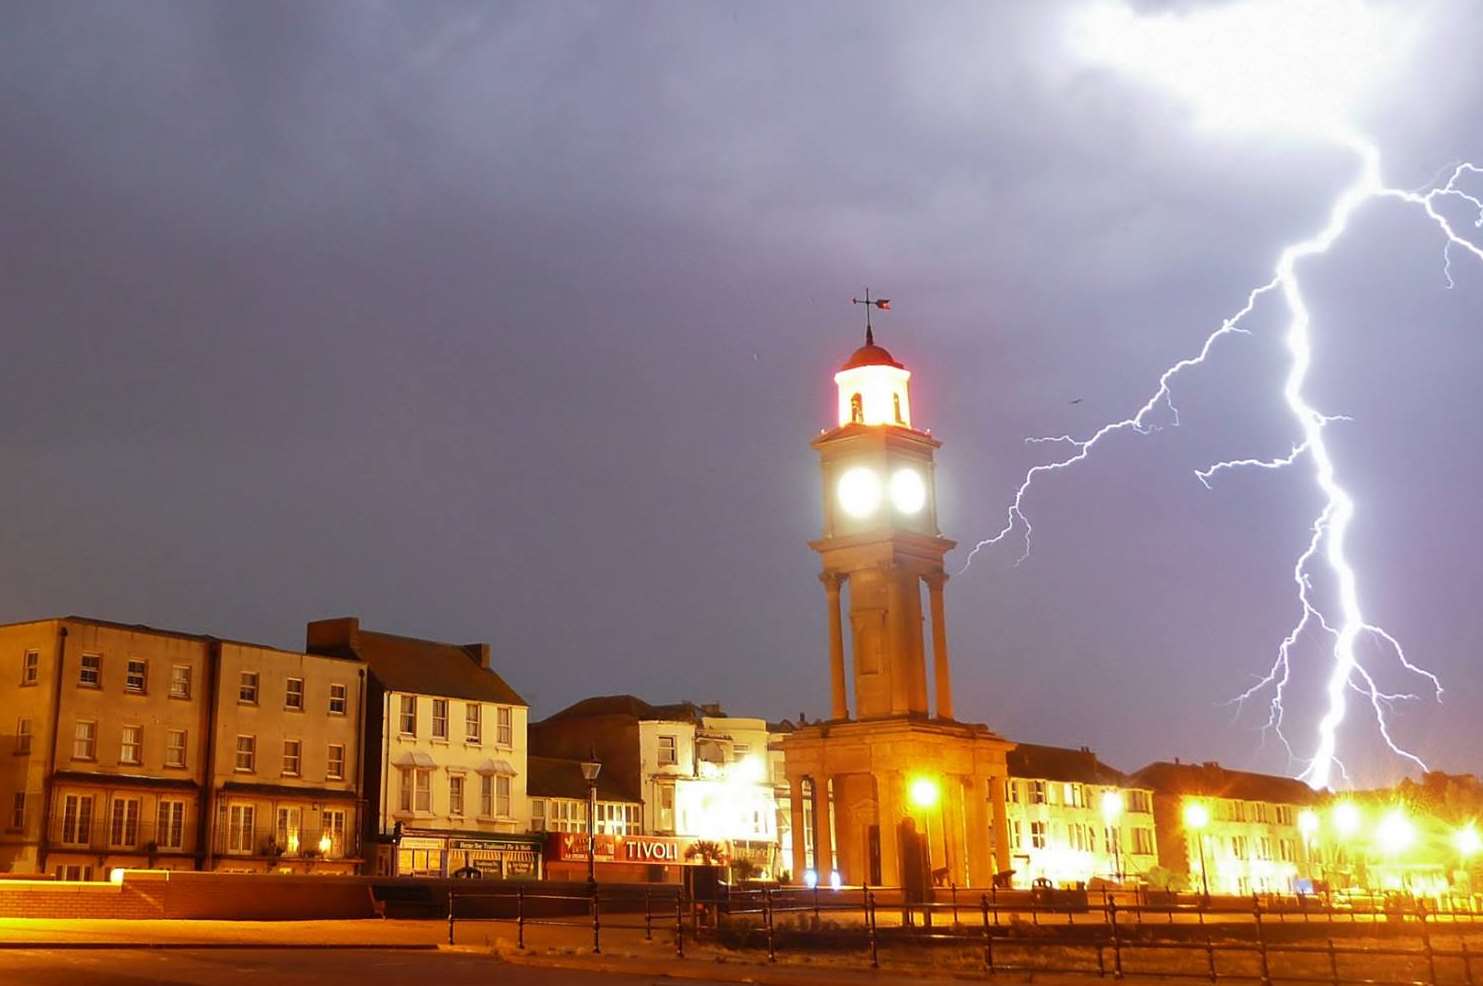 Paul Darby took this stunning photo of Herne Bay clock tower